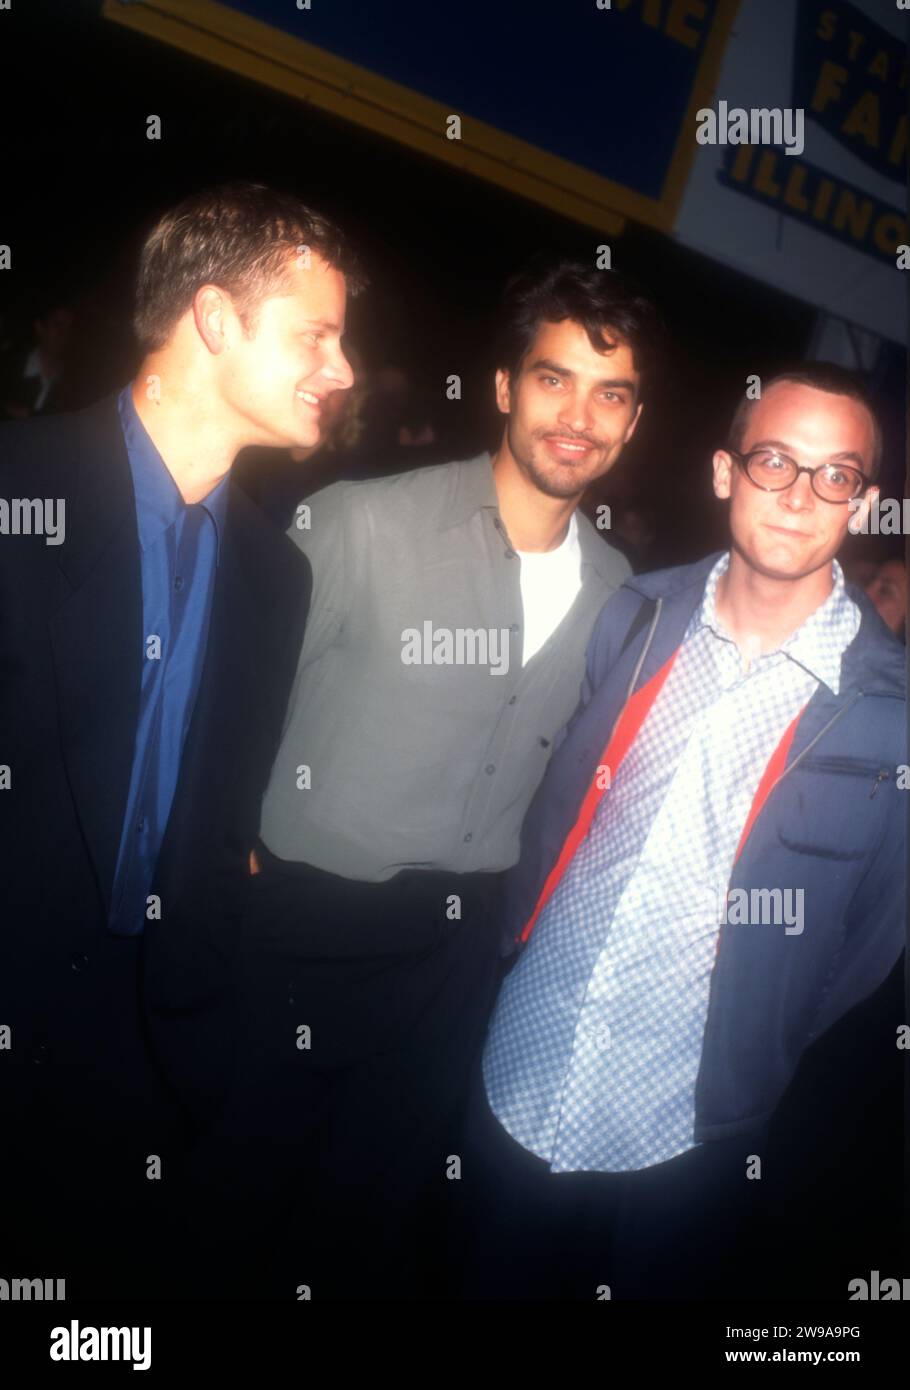 Century City, California, USA 30th September 1996 (L-R) Actor Steve Zahn, Actor Johnathon Schaech and Actor Ethan Embry attend 20th Century StudioÕs ÔThat Thing You DoÕ Premiere at Century City Cineplex Odeon Theaters on September 30, 1996 in Century City, California, USA. Photo by Barry King/Alamy Stock Photo Stock Photo